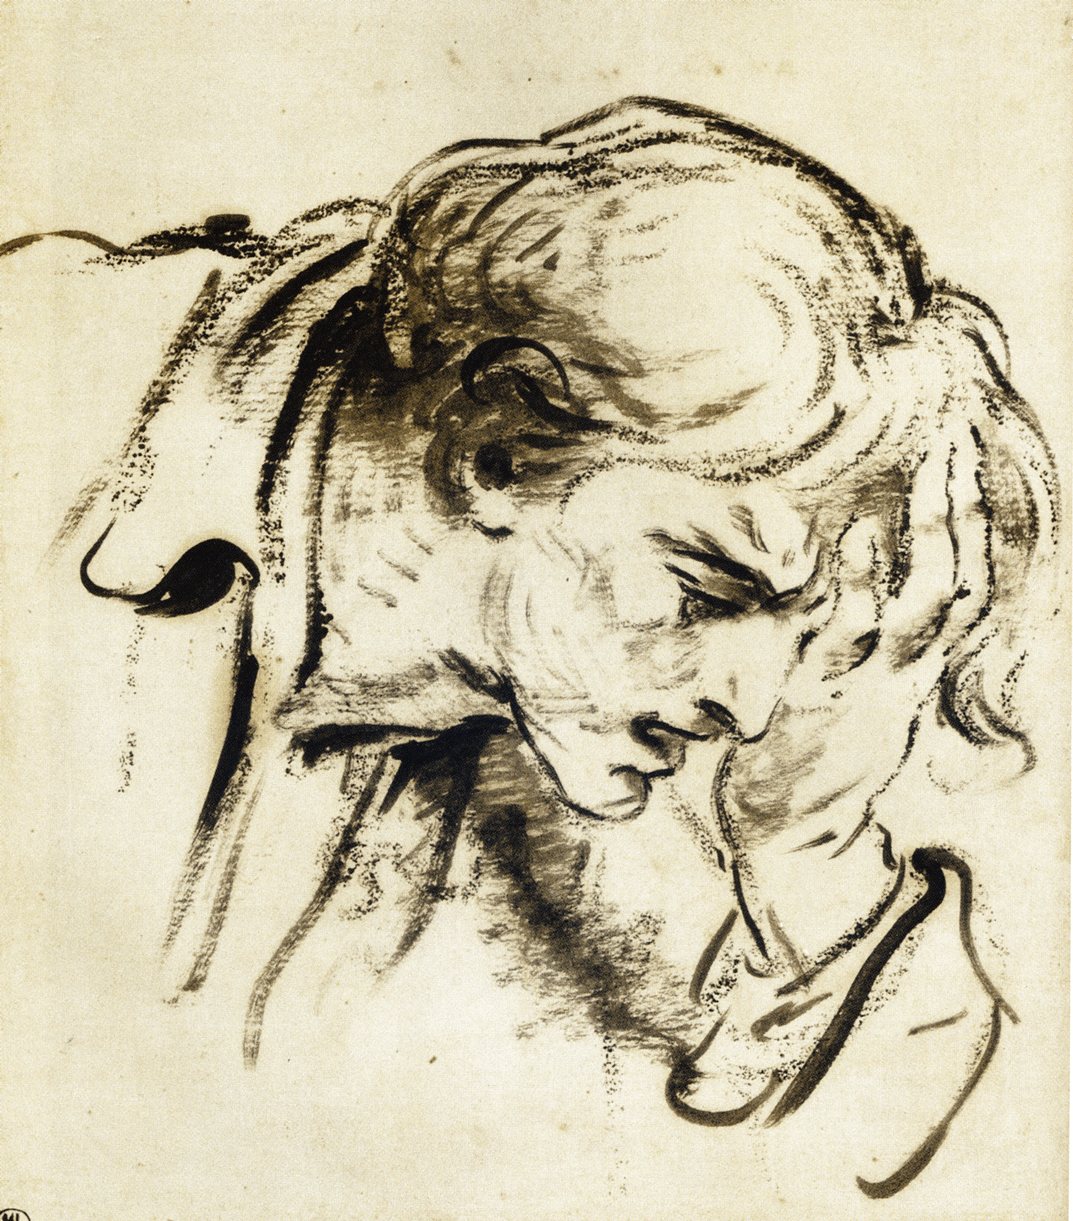 Old Master drawing of head and neck of a man in anguish or pain.